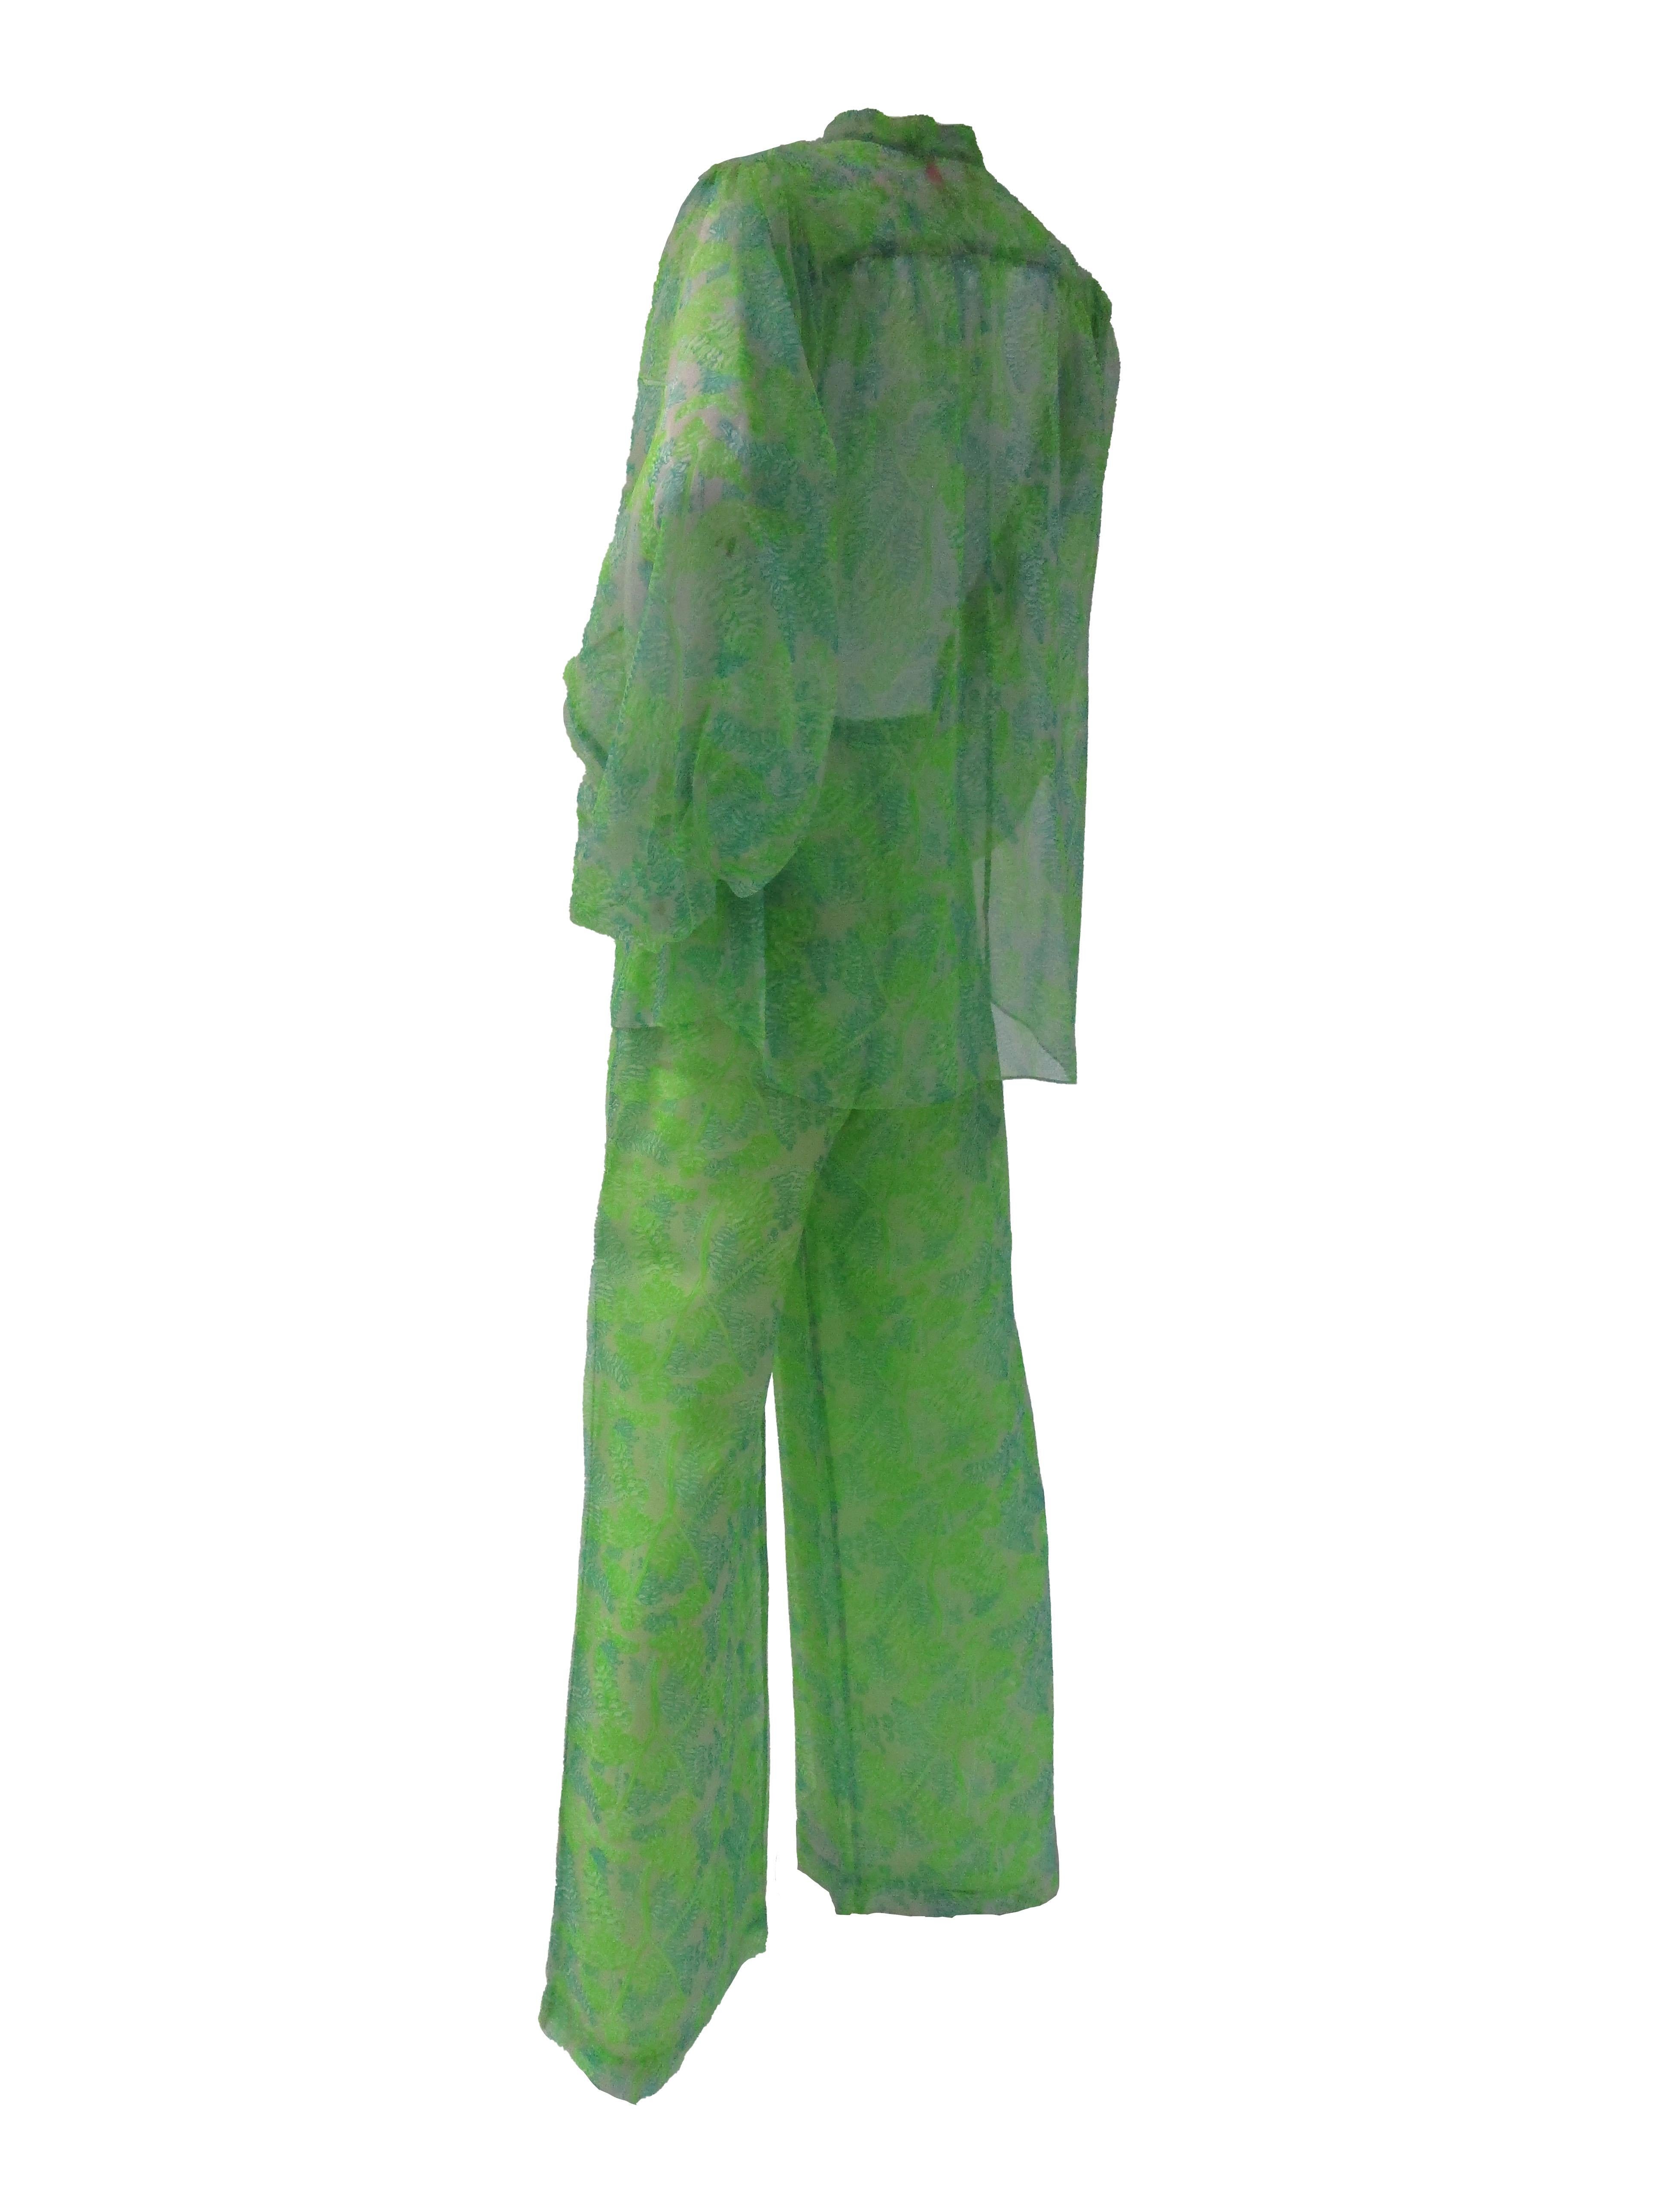 Women's Rare 1970s “Liza” by Lilly Pulitzer Green Sheer Resort Ensemble  For Sale